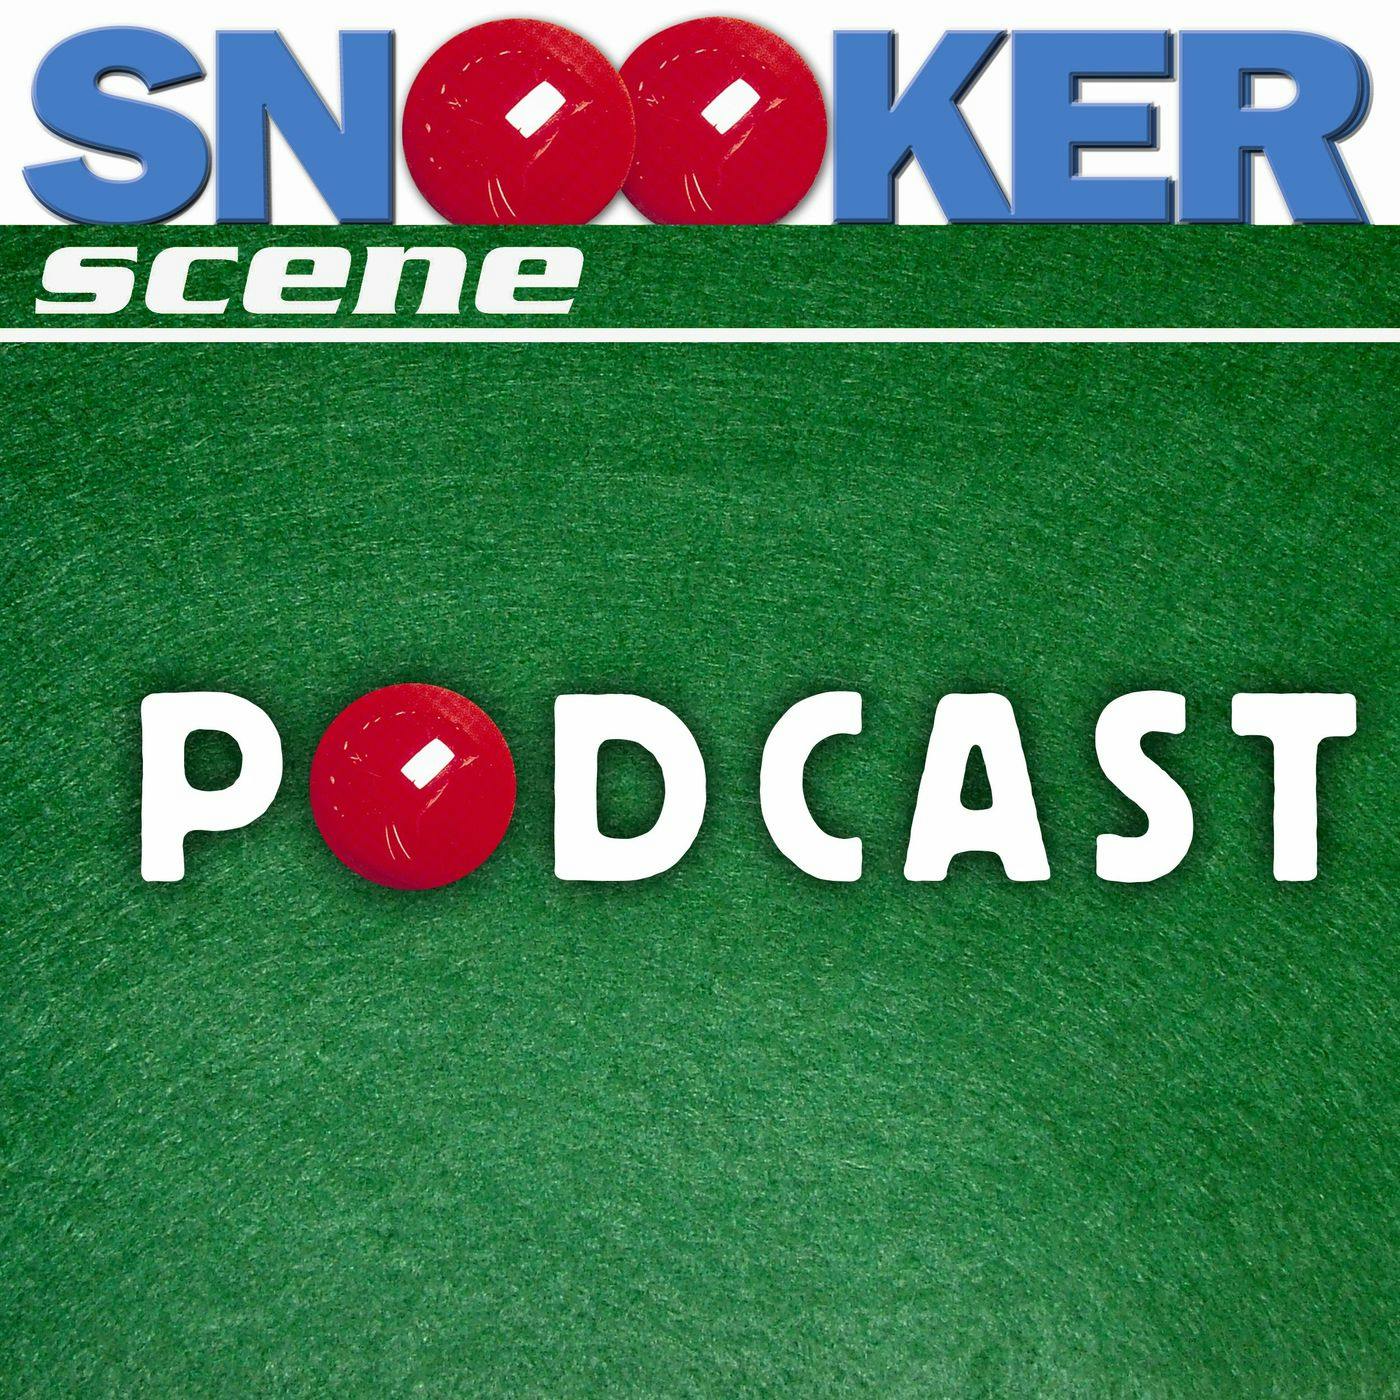 Snooker Scene Podcast episode 74 - The A to Z of snooker part one